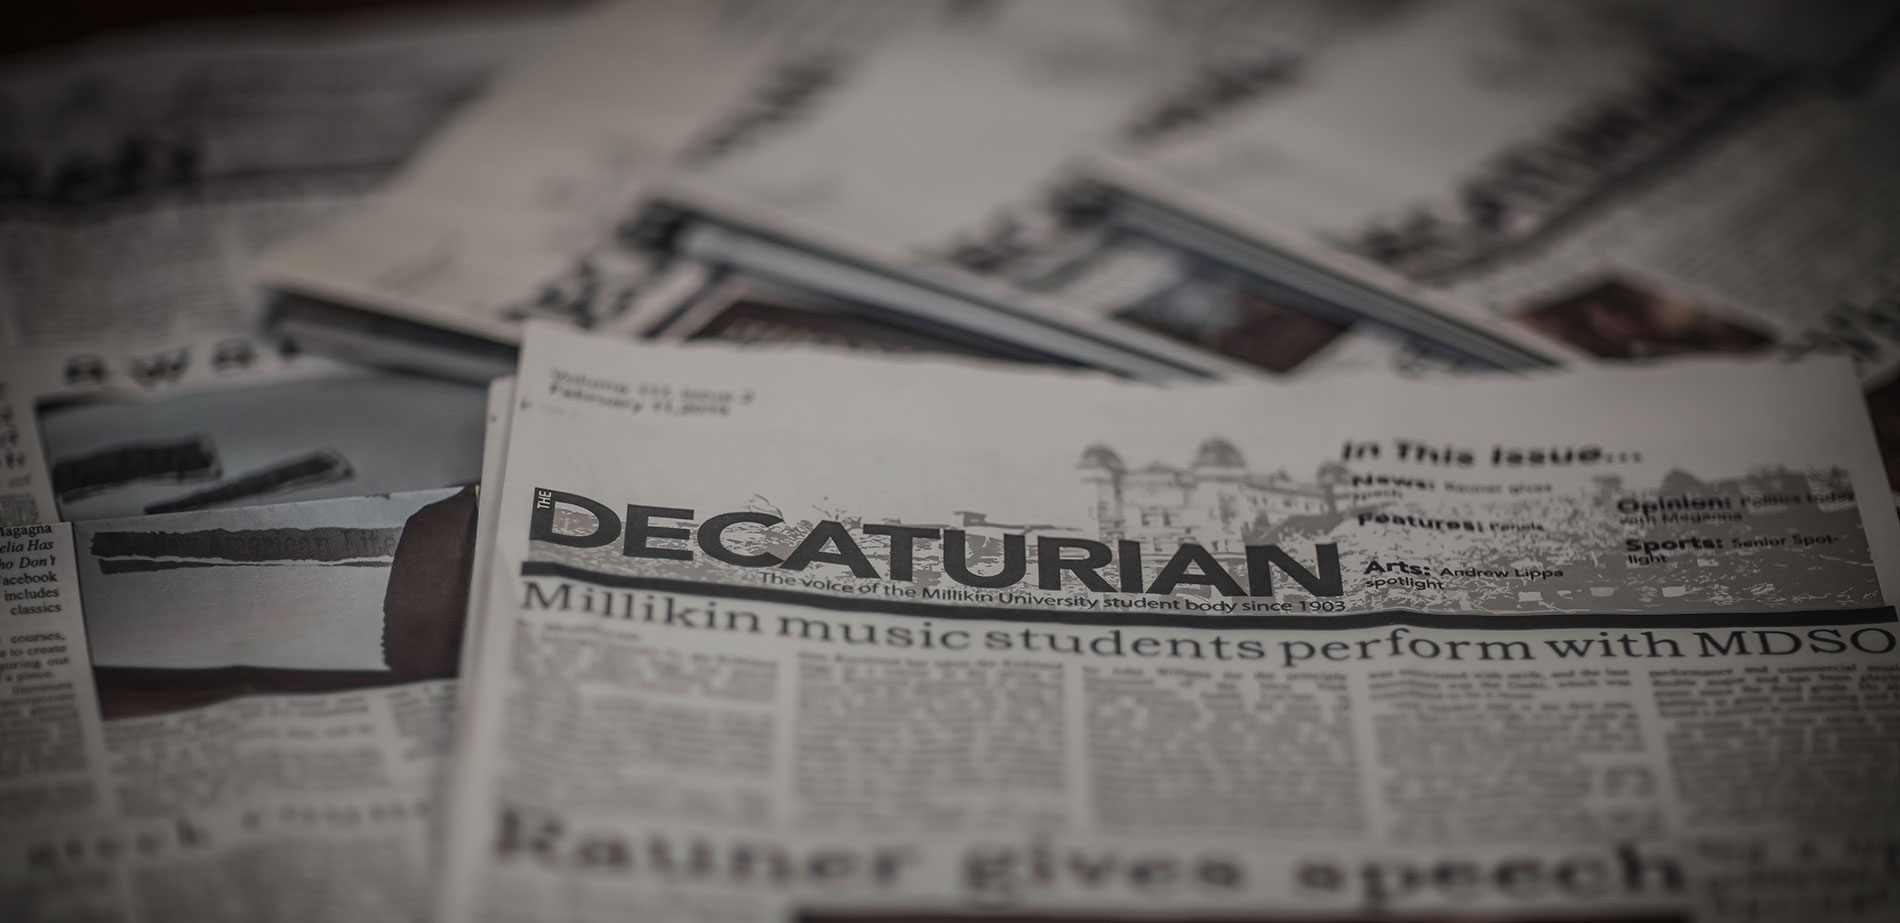 A close-up image of an issue of the Decaturian, which is the student-run newspaper at Millikin.